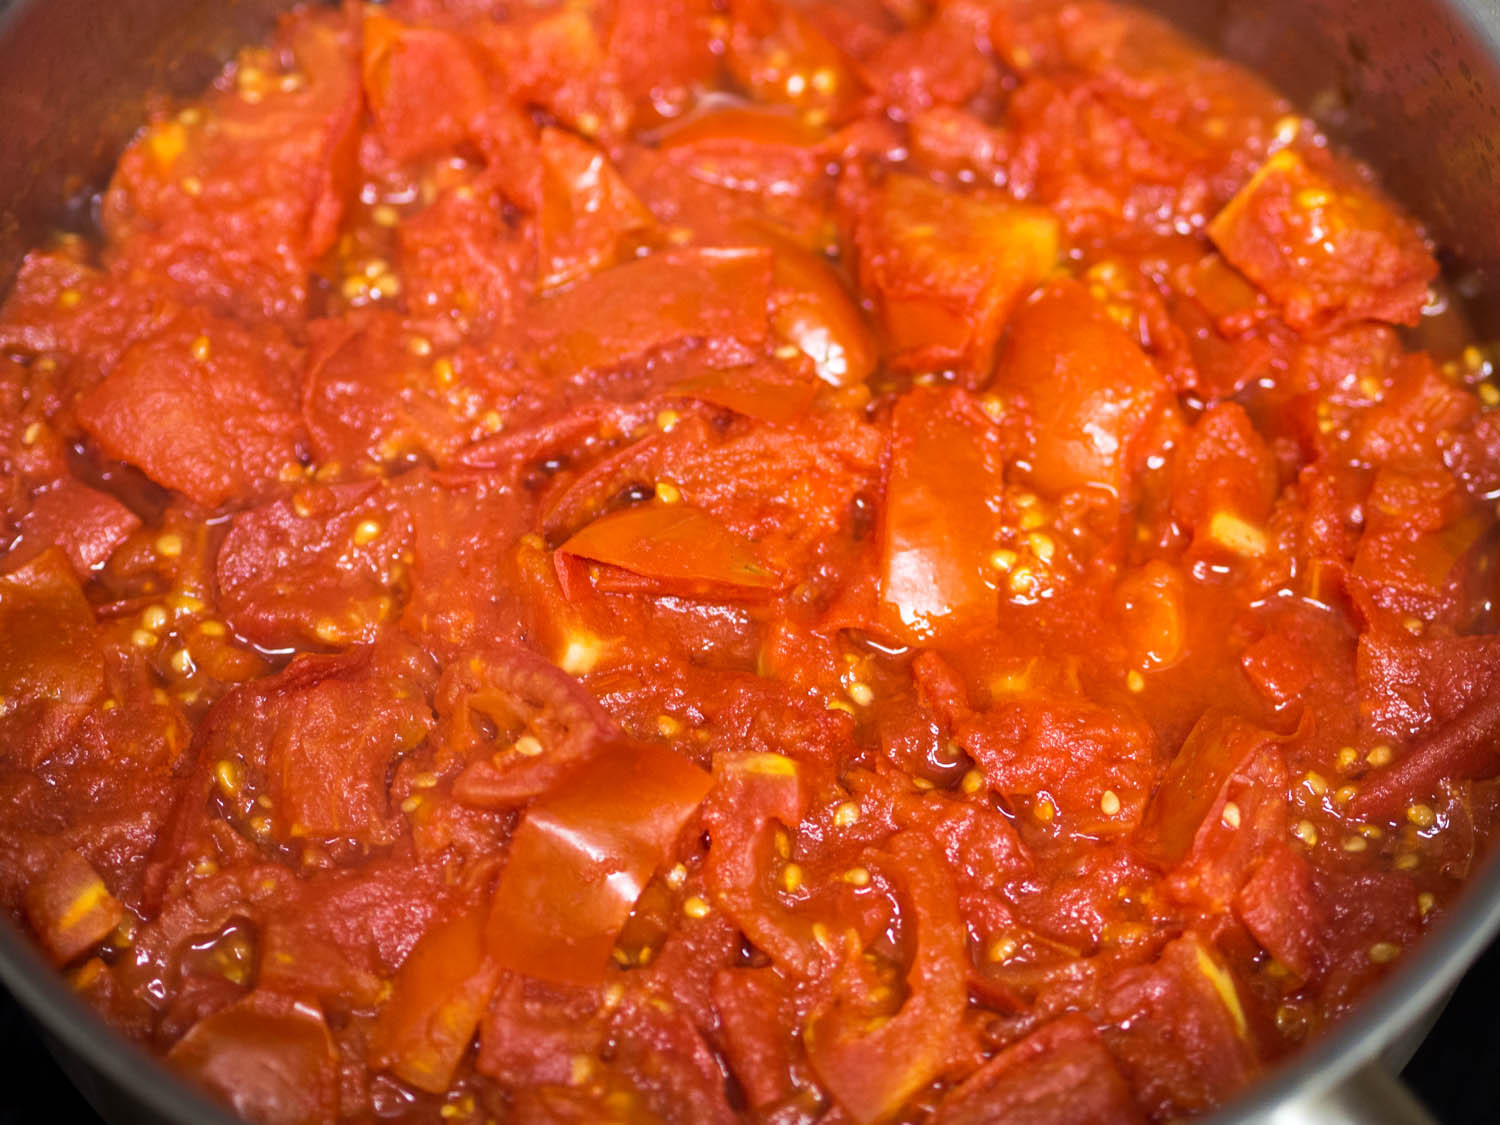 Tomato Sauce Recipes
 How to Make the Best Tomato Sauce From Fresh Tomatoes